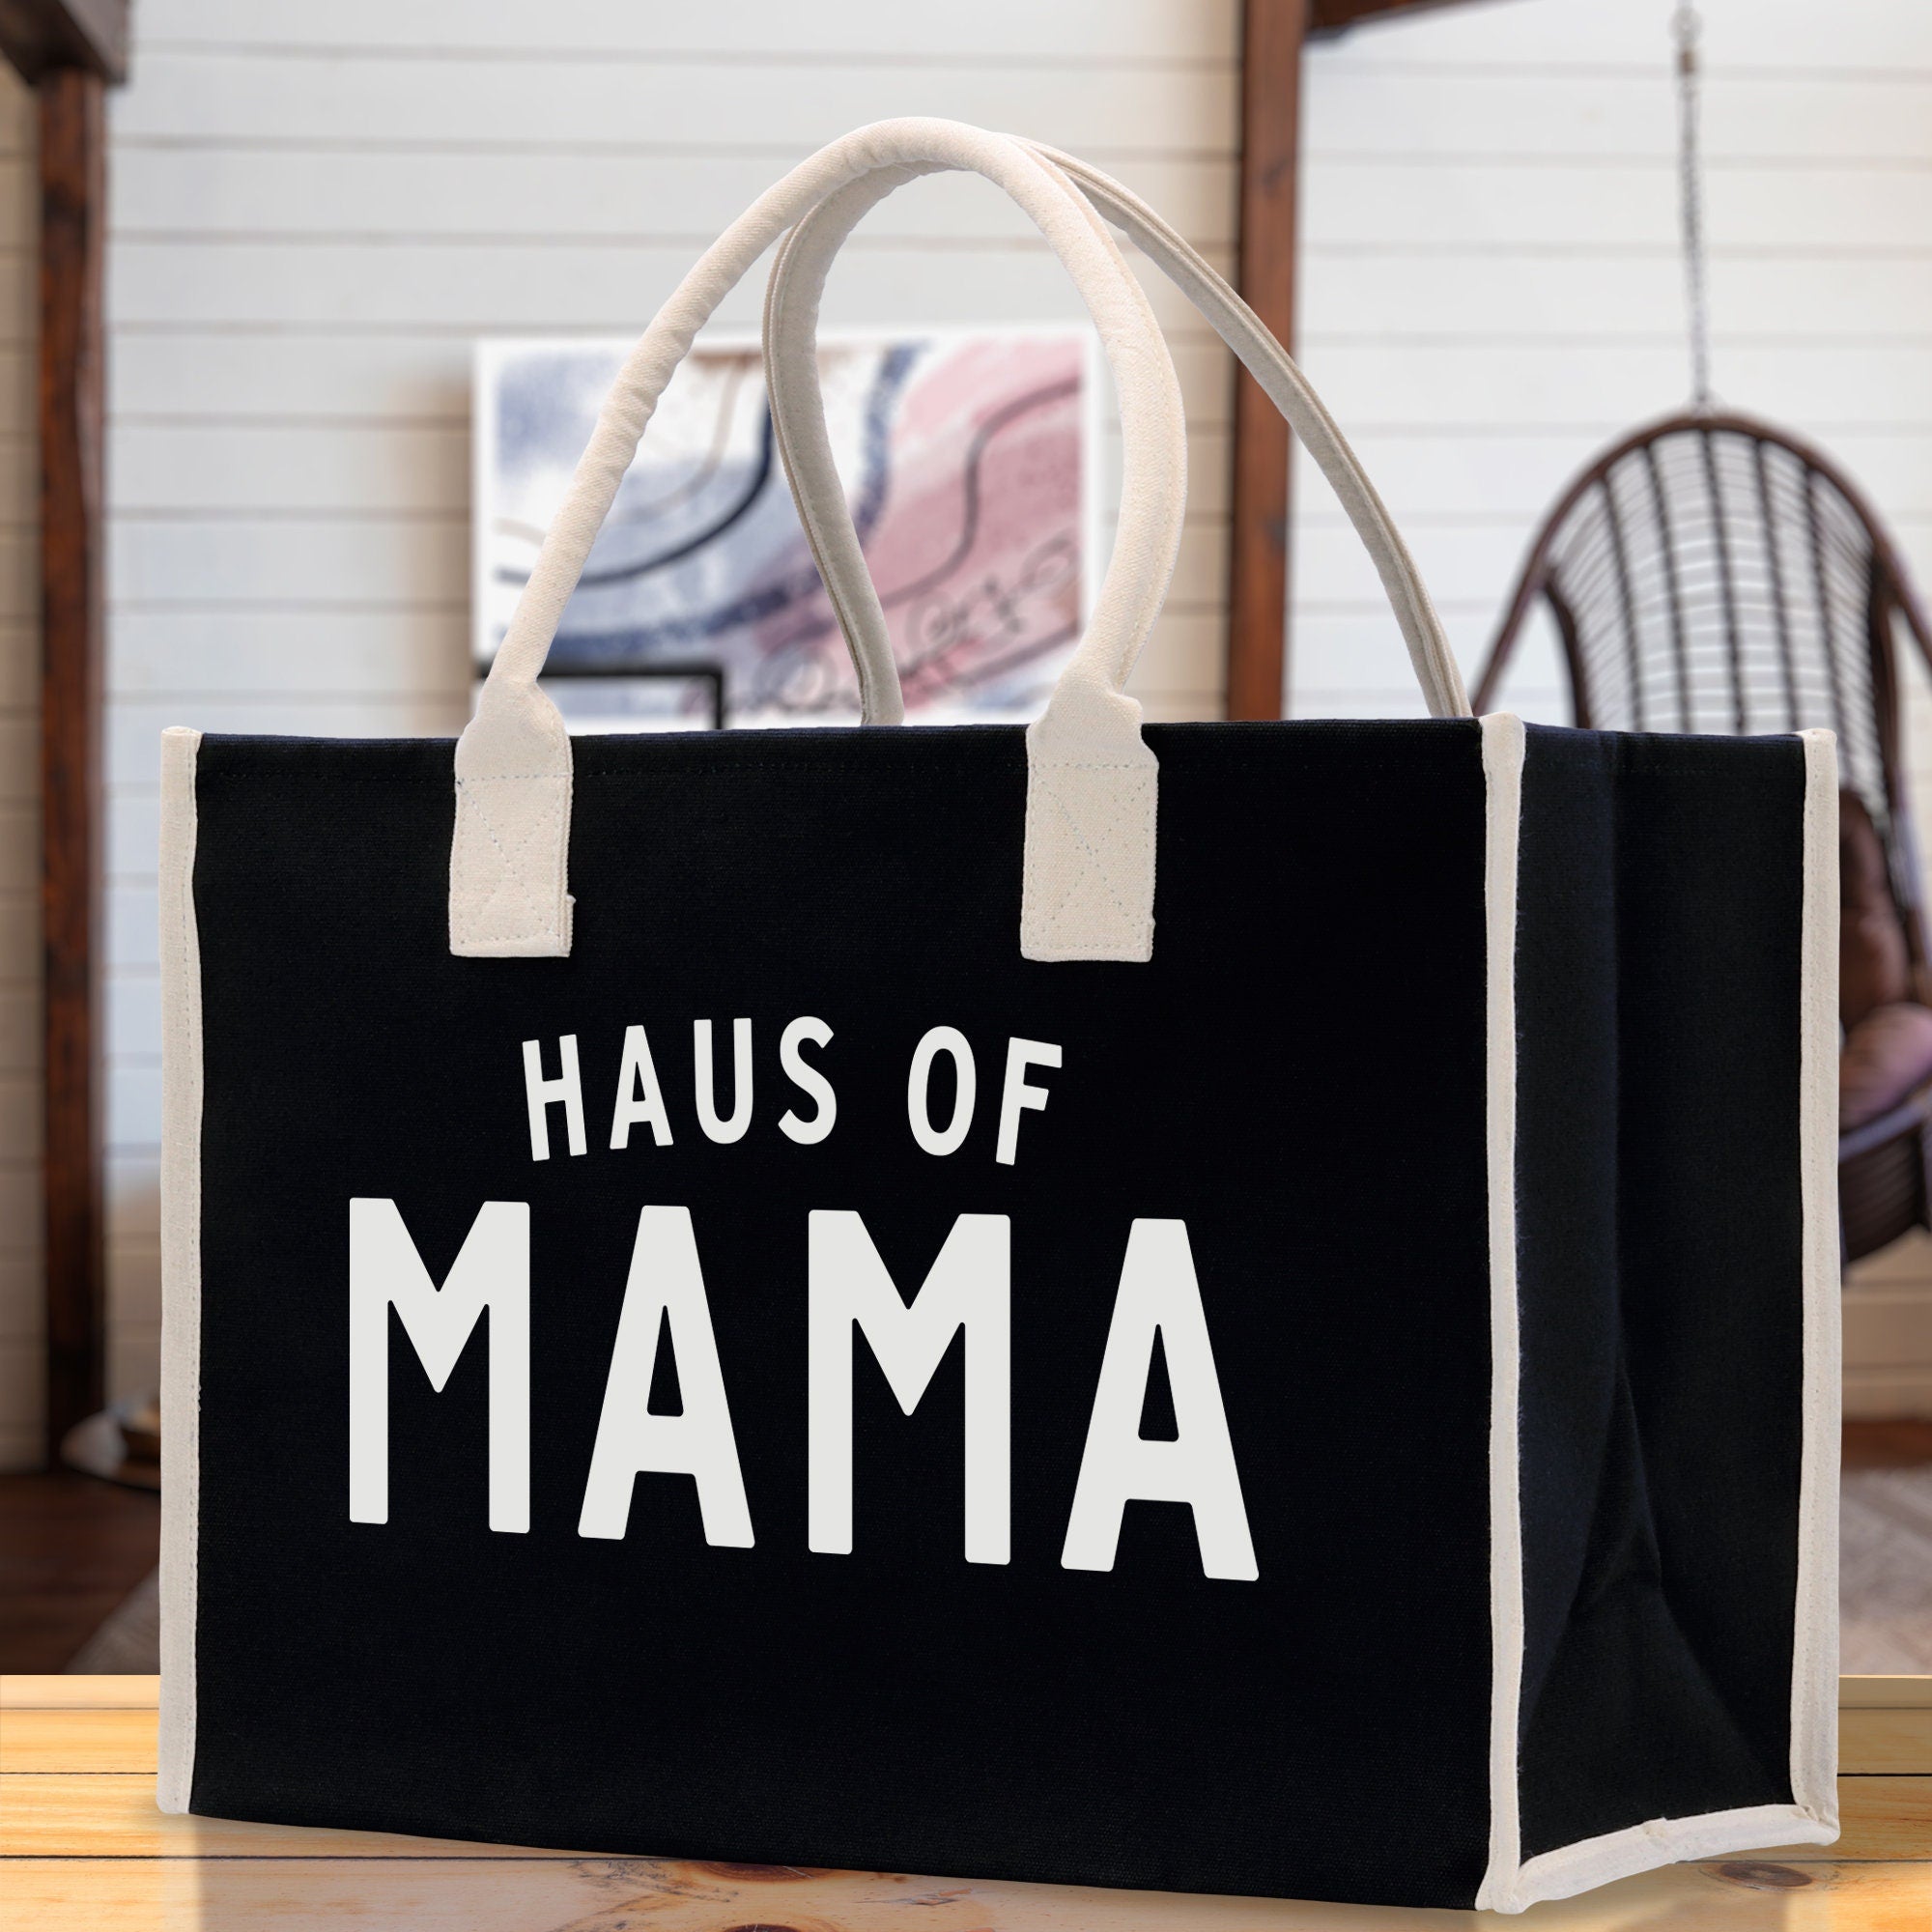 Haus of Mama Cotton Canvas Chic Beach Tote Bag Multipurpose Tote Weekender Tote Gift for Her Outdoor Tote Vacation Tote Large Beach Bag